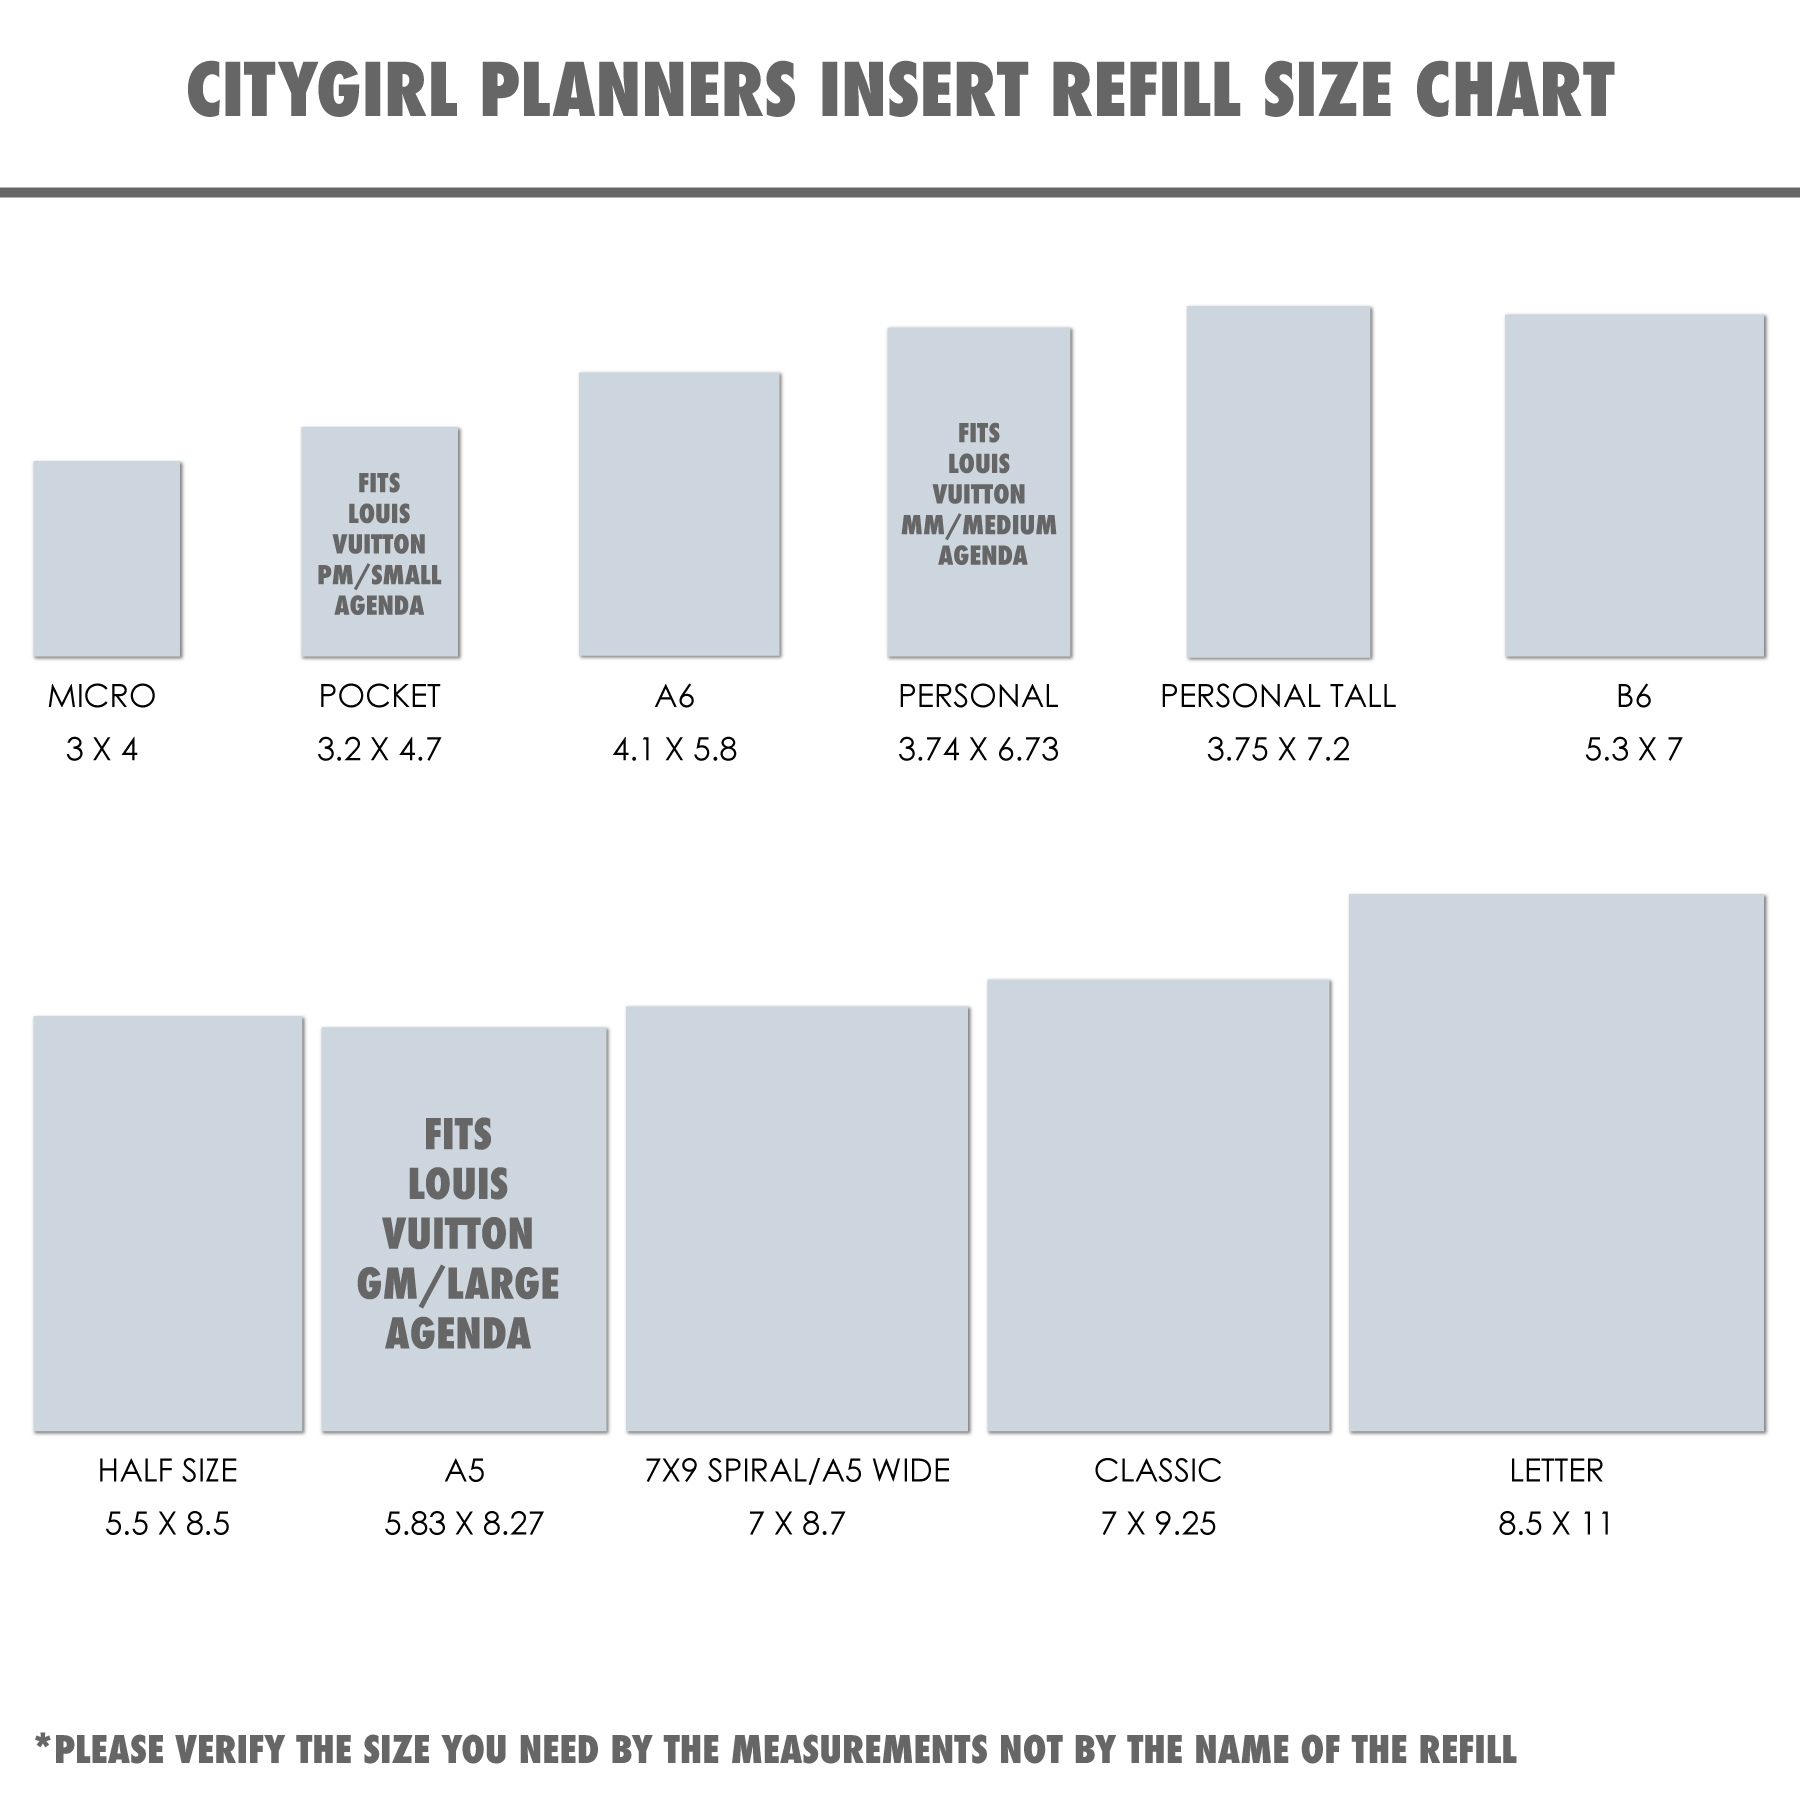 CItyGirl Planners Size Chart for refill inserts